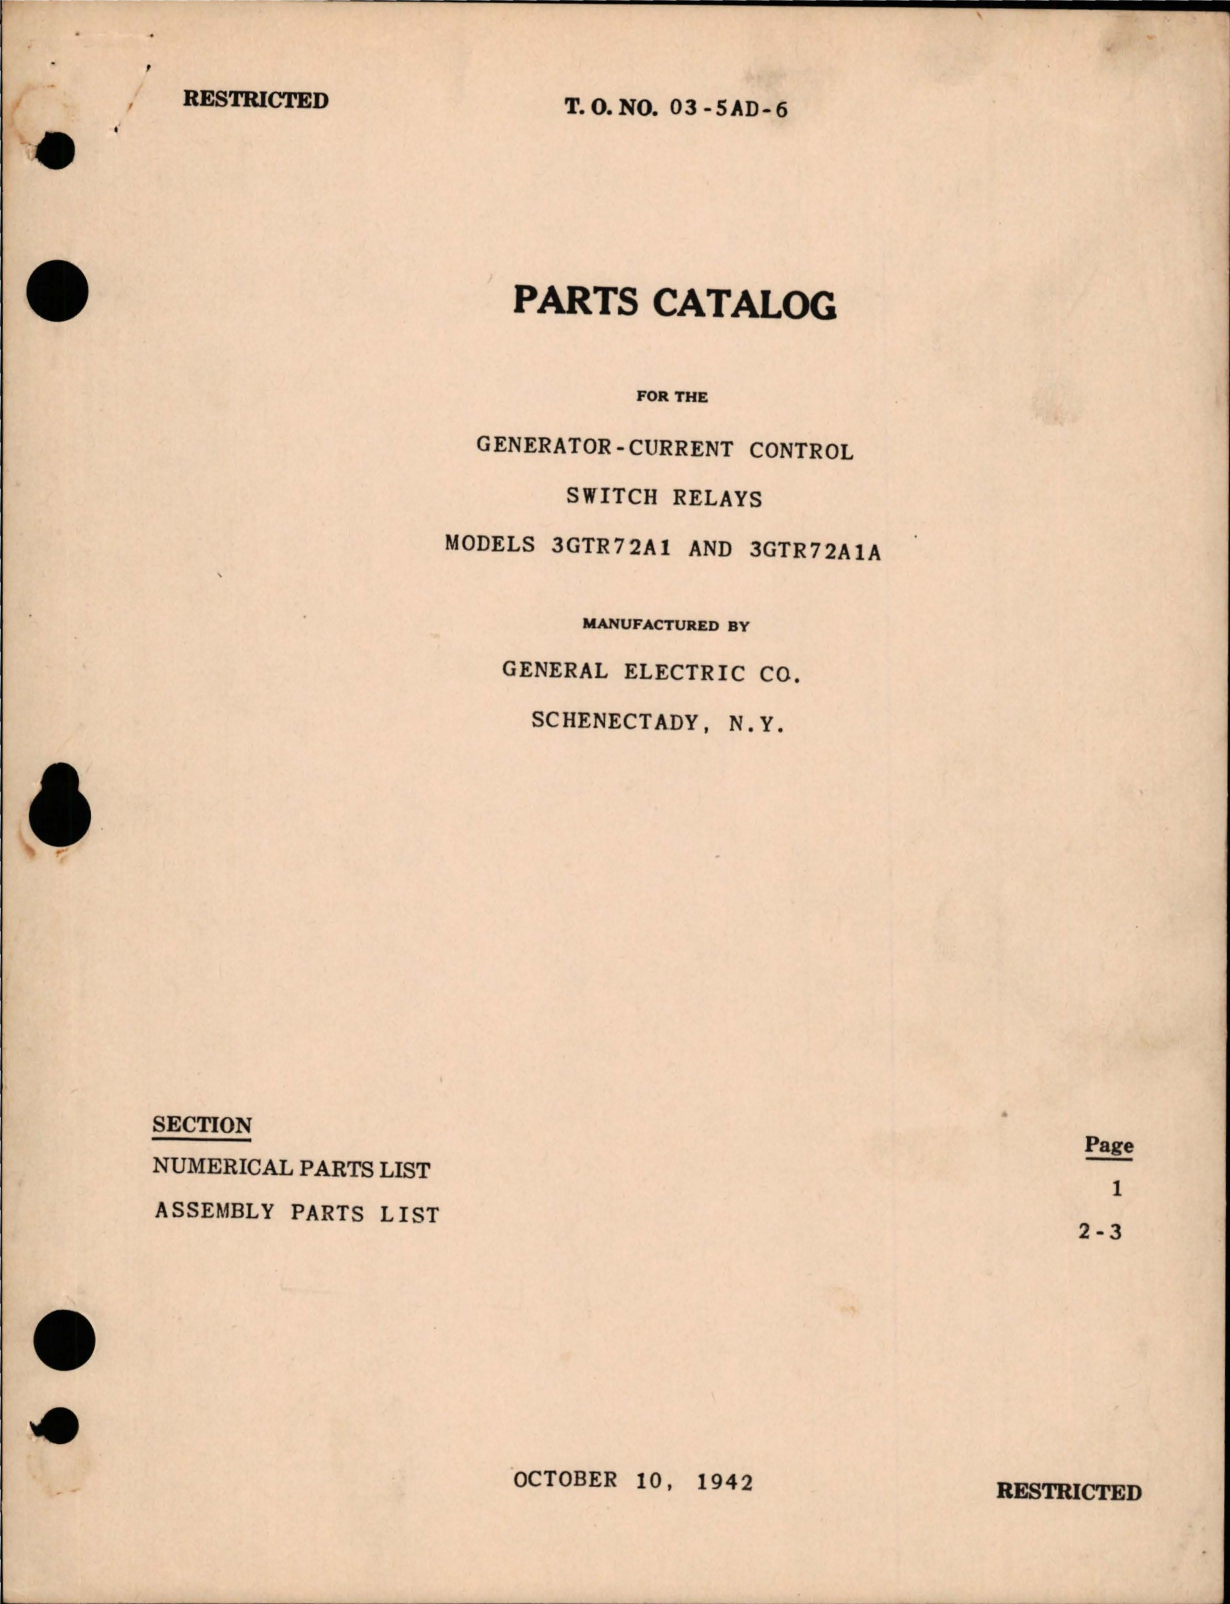 Sample page 1 from AirCorps Library document: Parts Catalog for Current Control Generator Switch Relays - Models 3GTR72A1 and 3GTR72A1A 